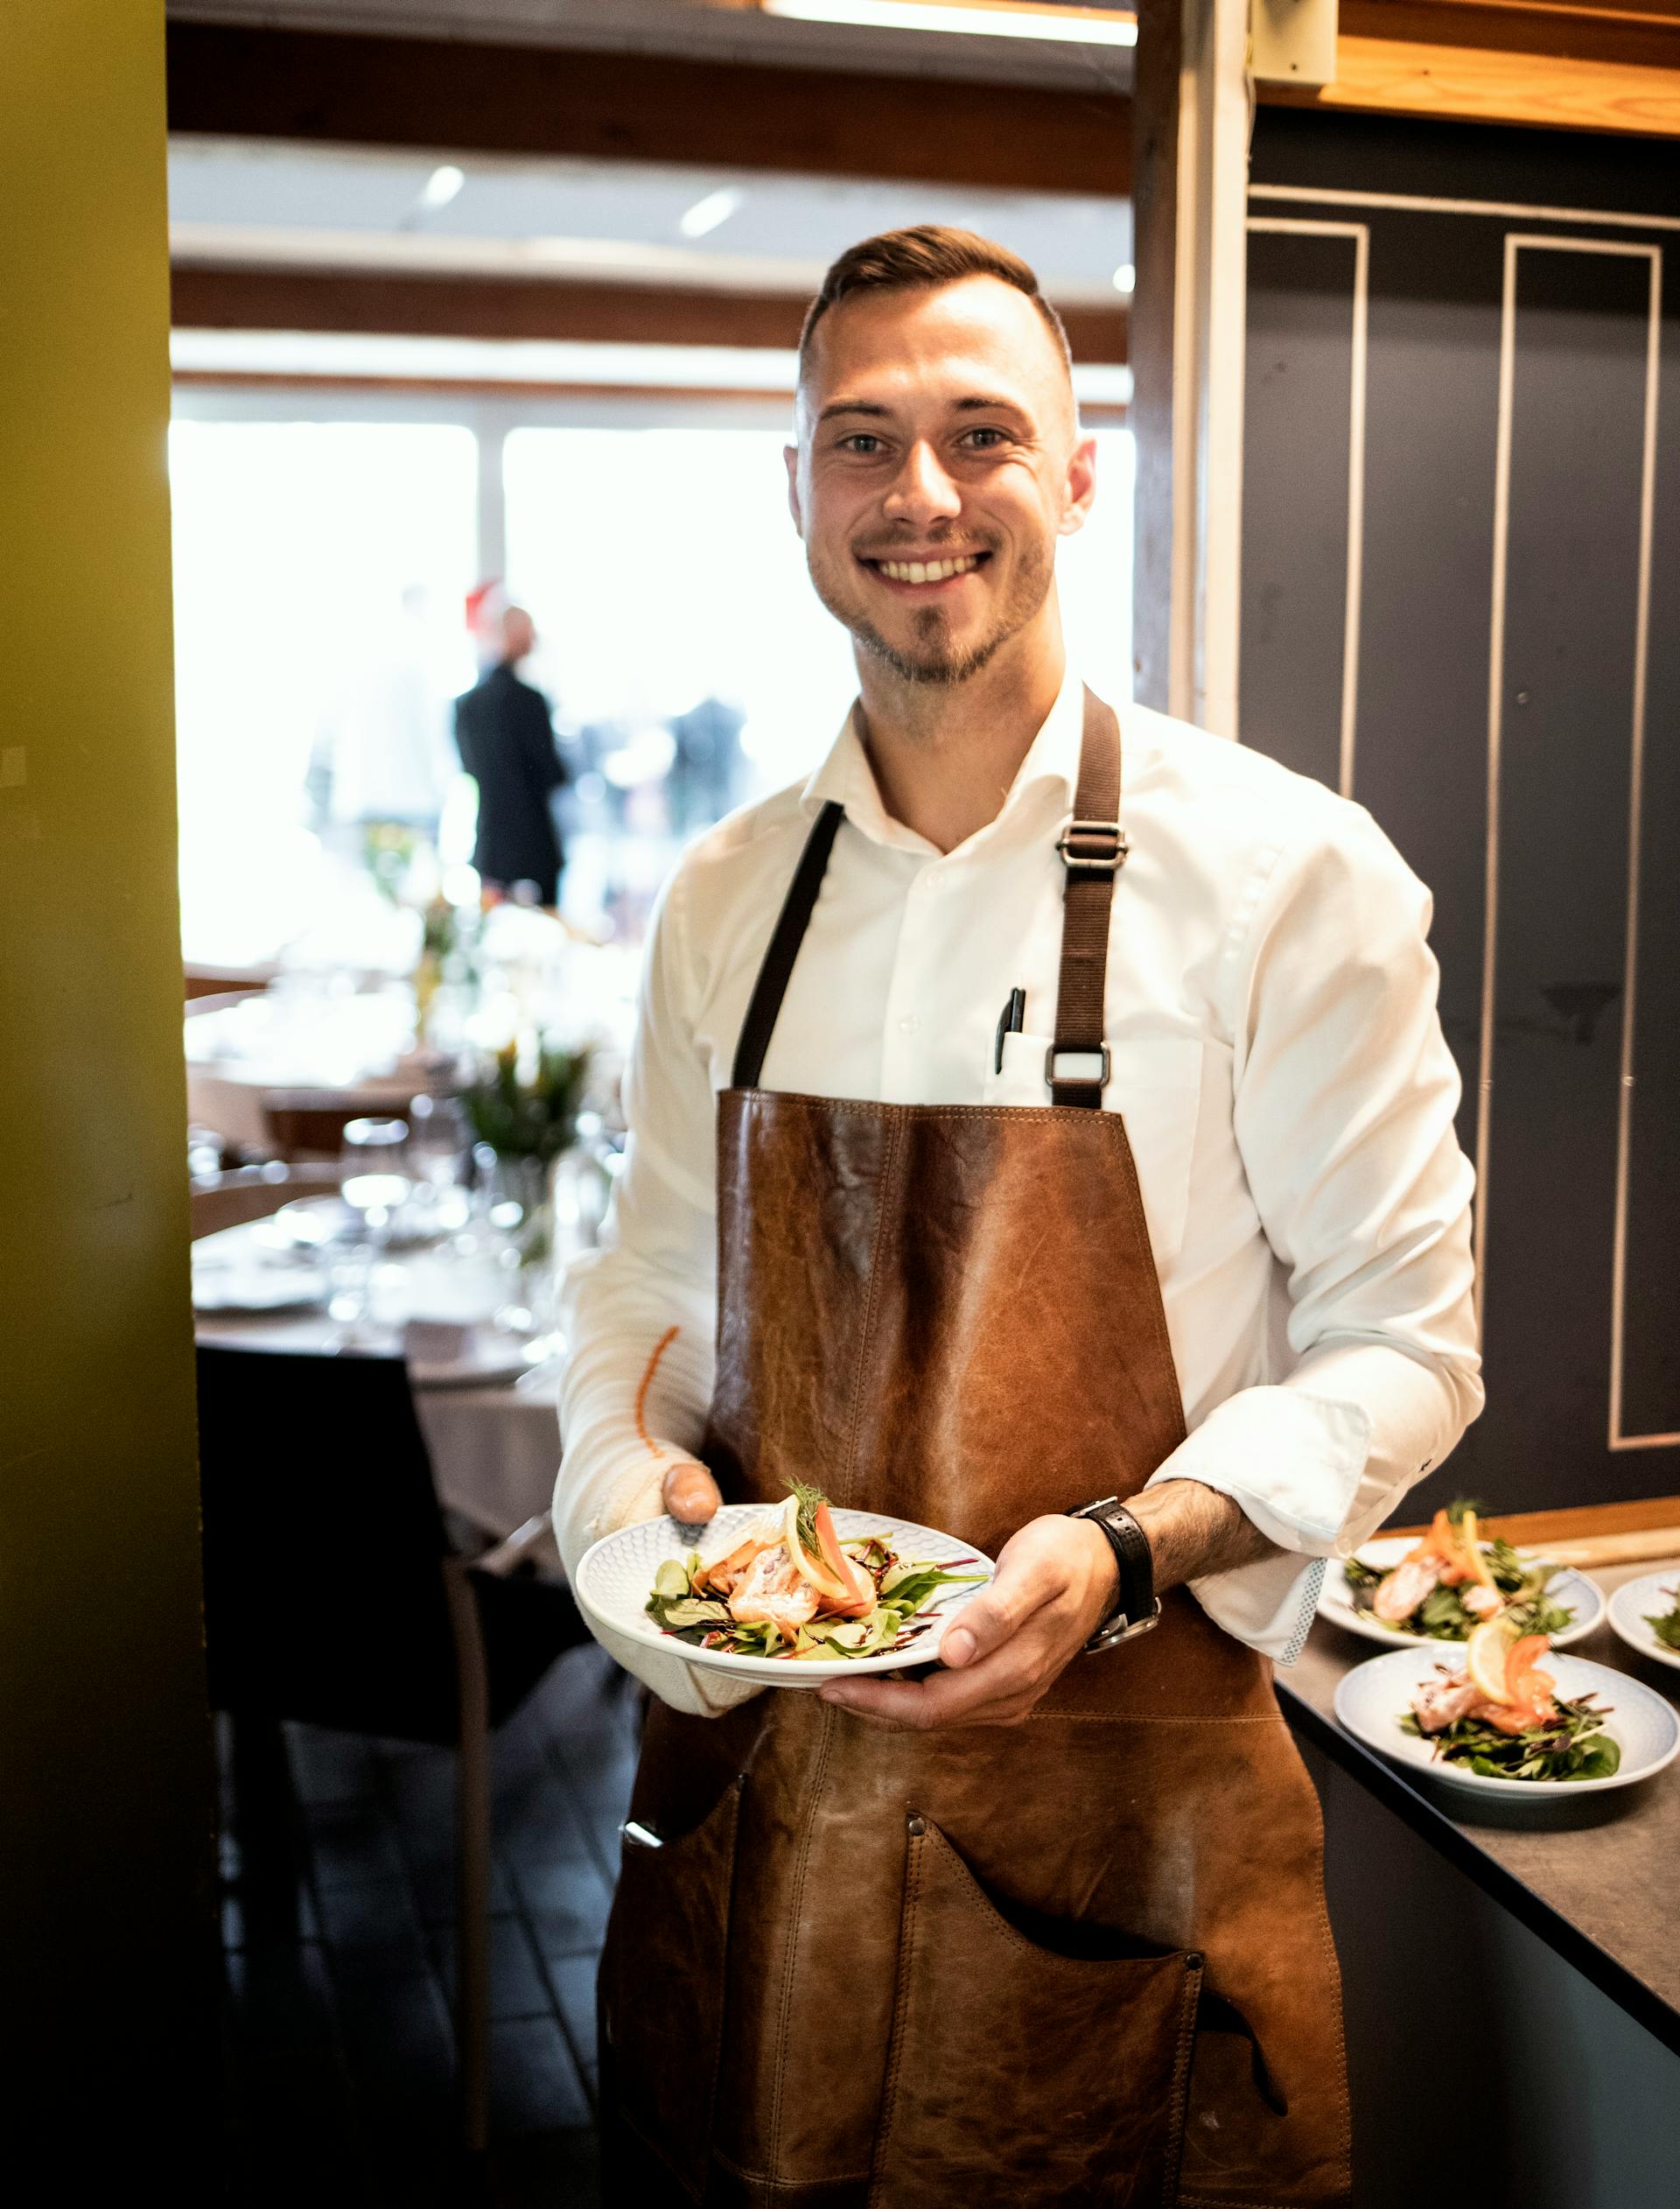 A waiter holding a dish | Source: Pexels